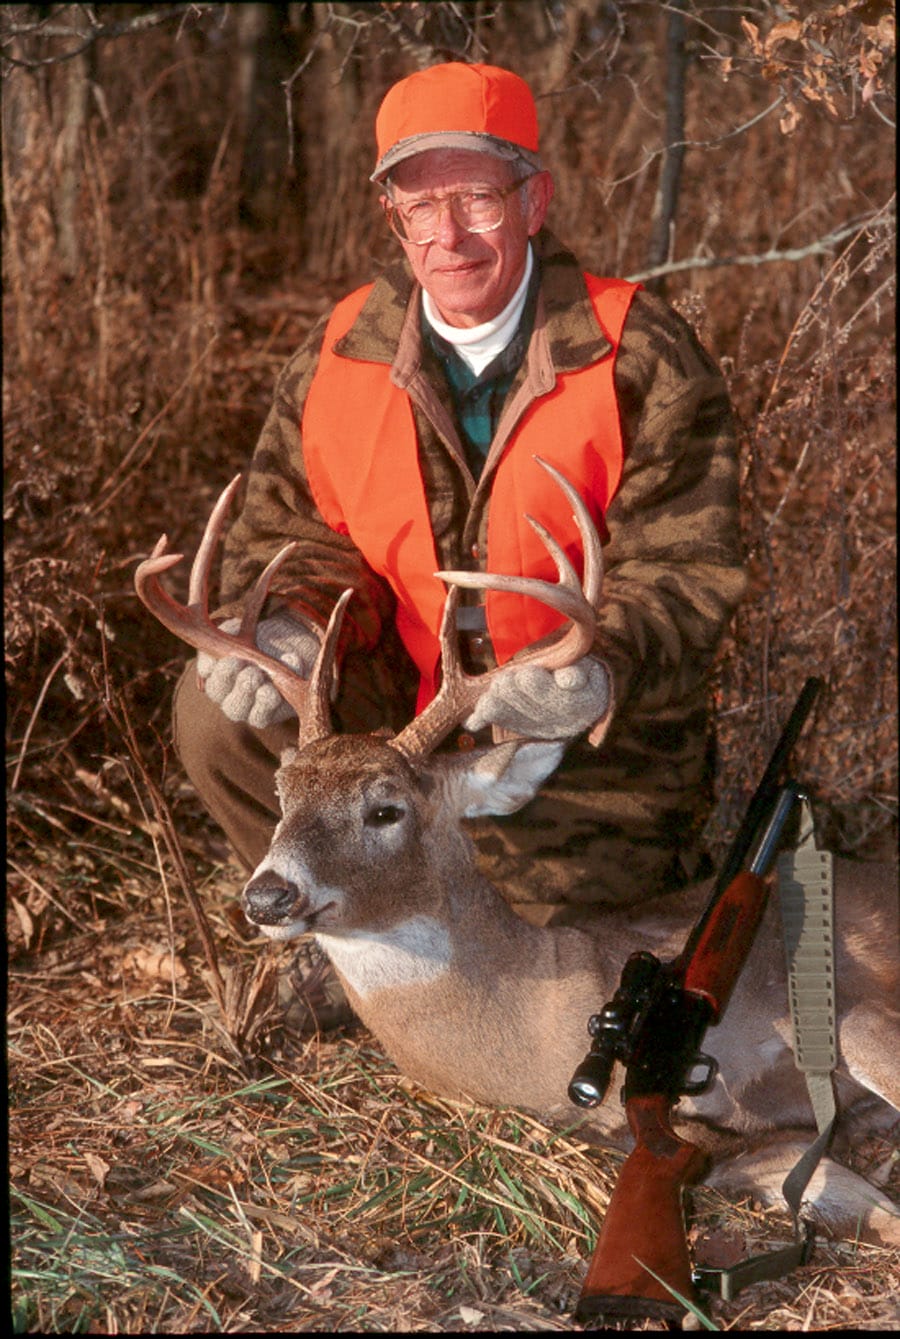 Any hunter knows the great joy and satisfaction of harvesting a deer. The next level of satisfaction is processing your own deer to fill the freezer with the ultimate in organic meat.